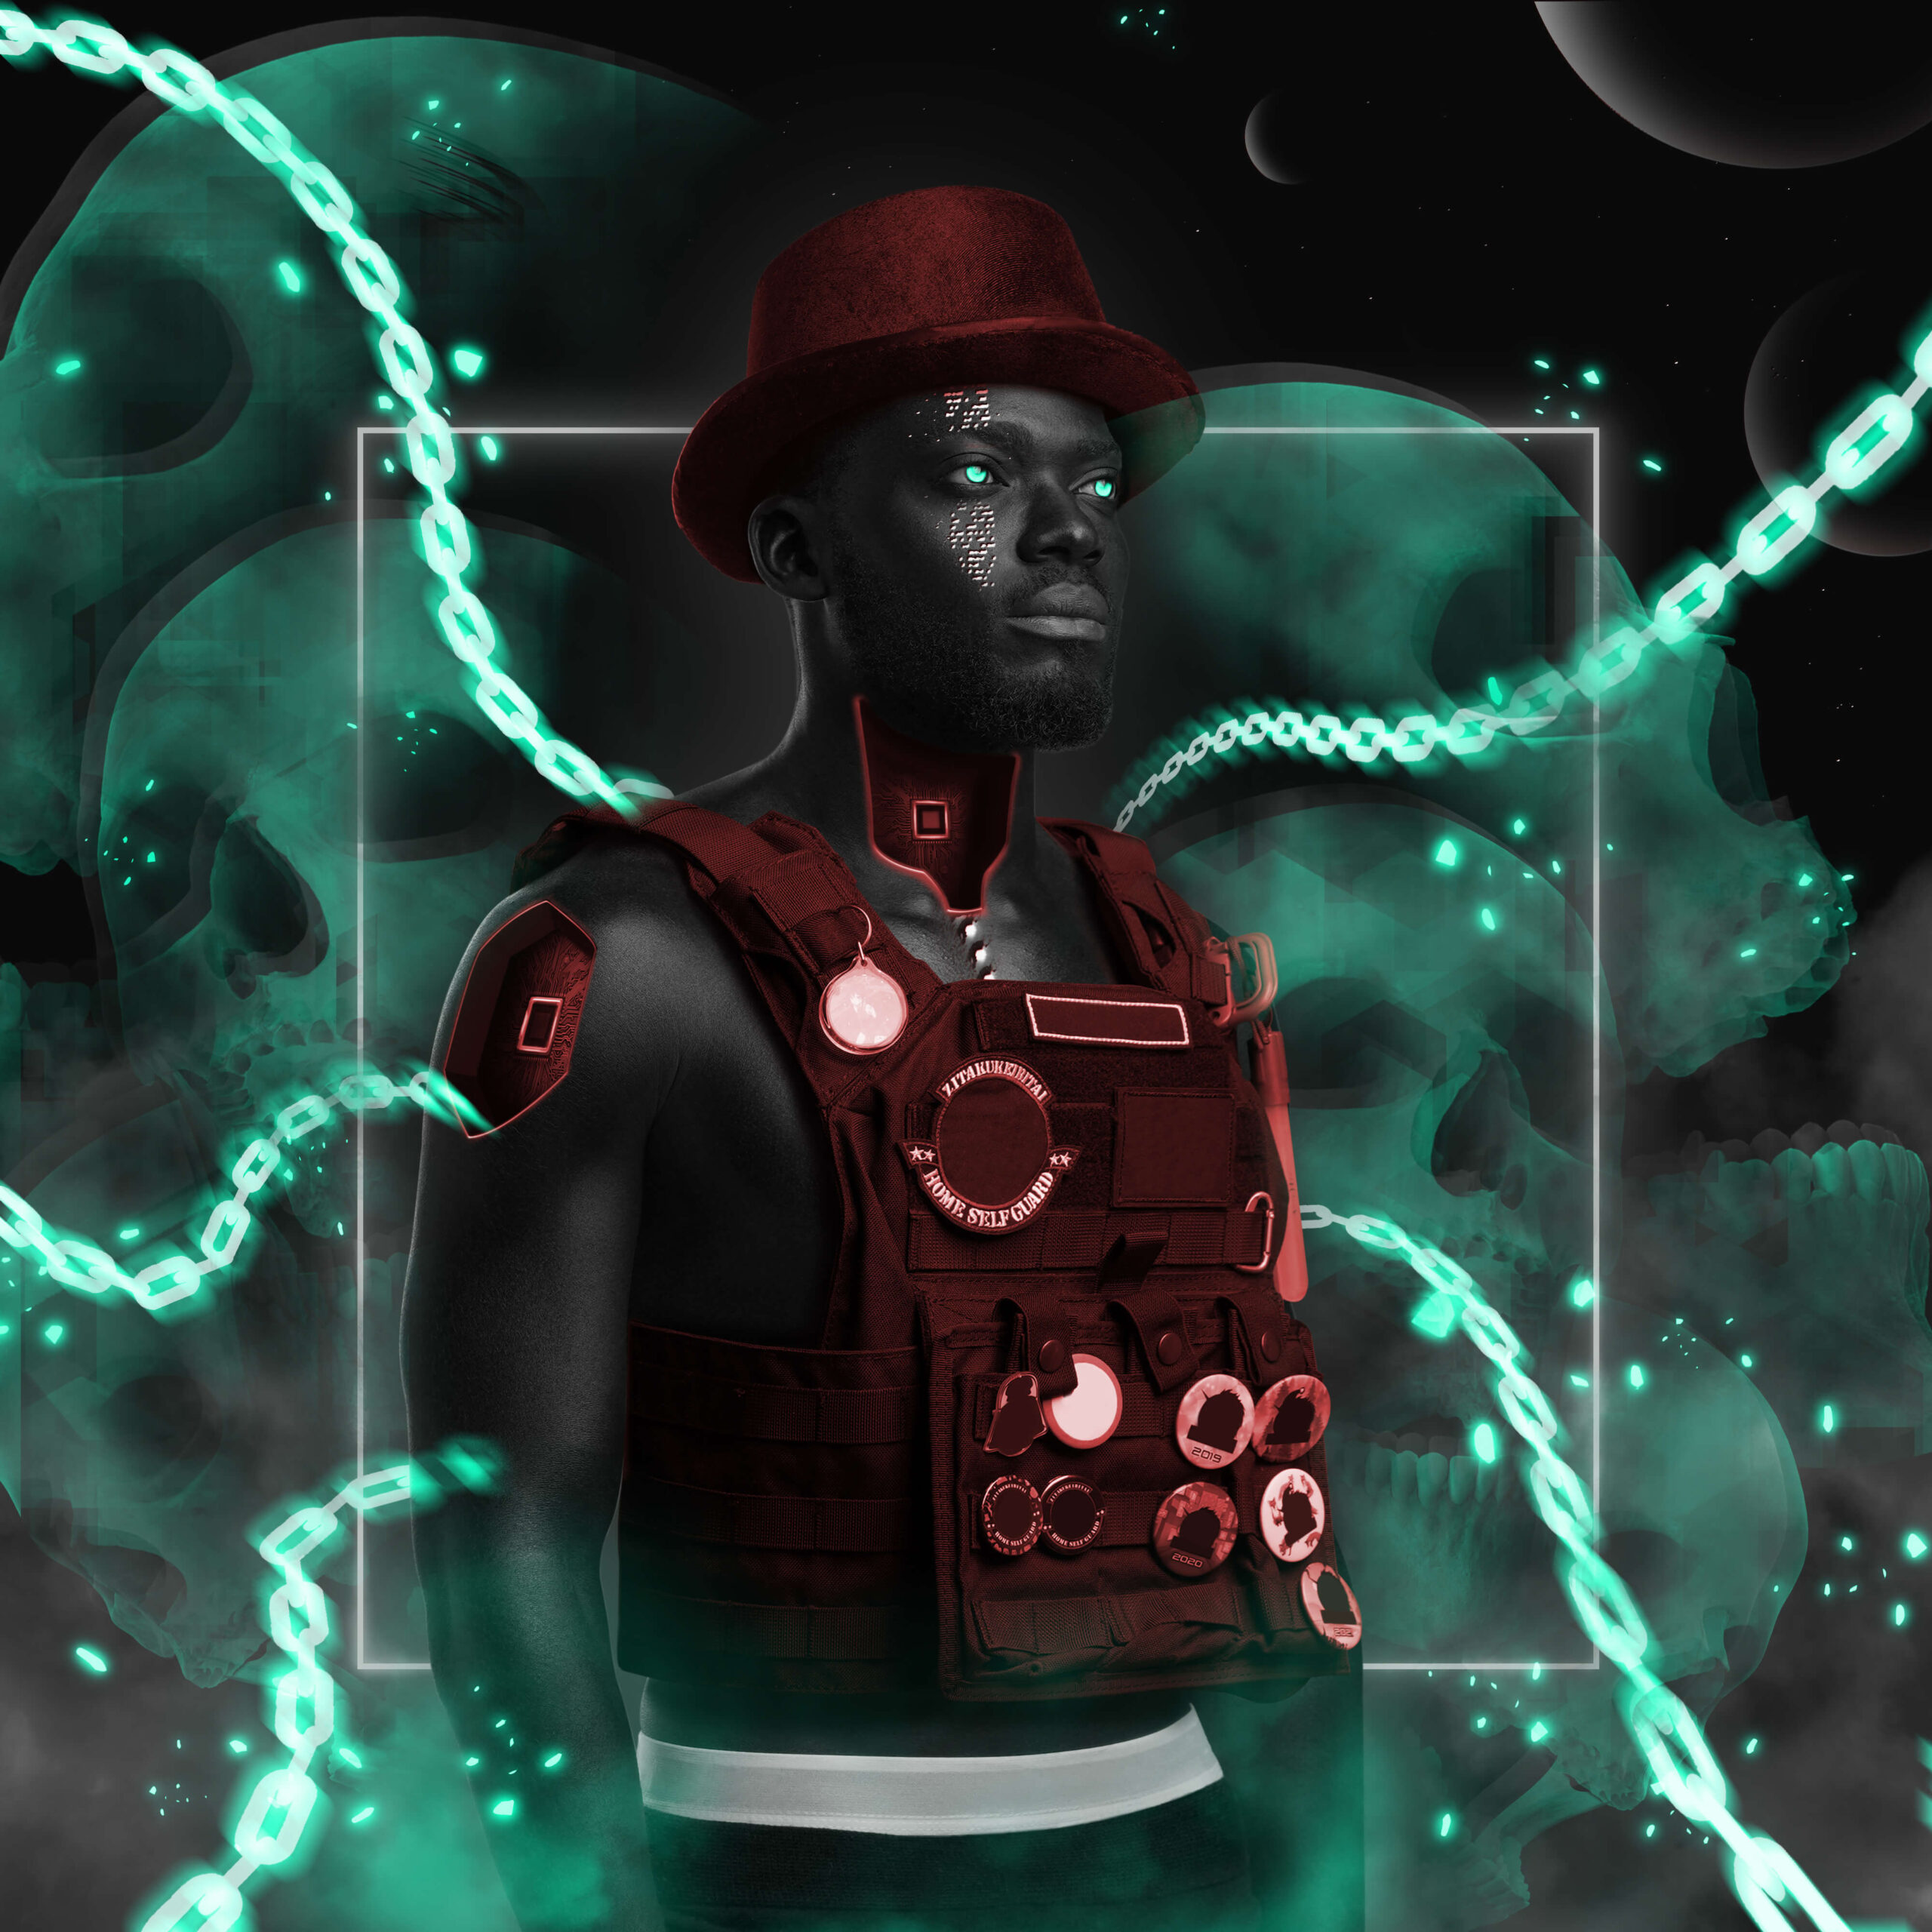 collection, set, assembly, select, non fungible token, non-fungible token, nft, artwork, art, portrait, fashion, style, adult, skin, metallic, iron, cyberpunk, futuristic, man, male, guy, african, black, alone, one person, square, teal, collection, set, assembly, select, non fungible token, non-fungible token, nft, artwork, art, portrait, fashion, style, adult, skin, metallic, iron, cyberpunk, futuristic, man, male, guy, african, black, alone, one person, square, teal